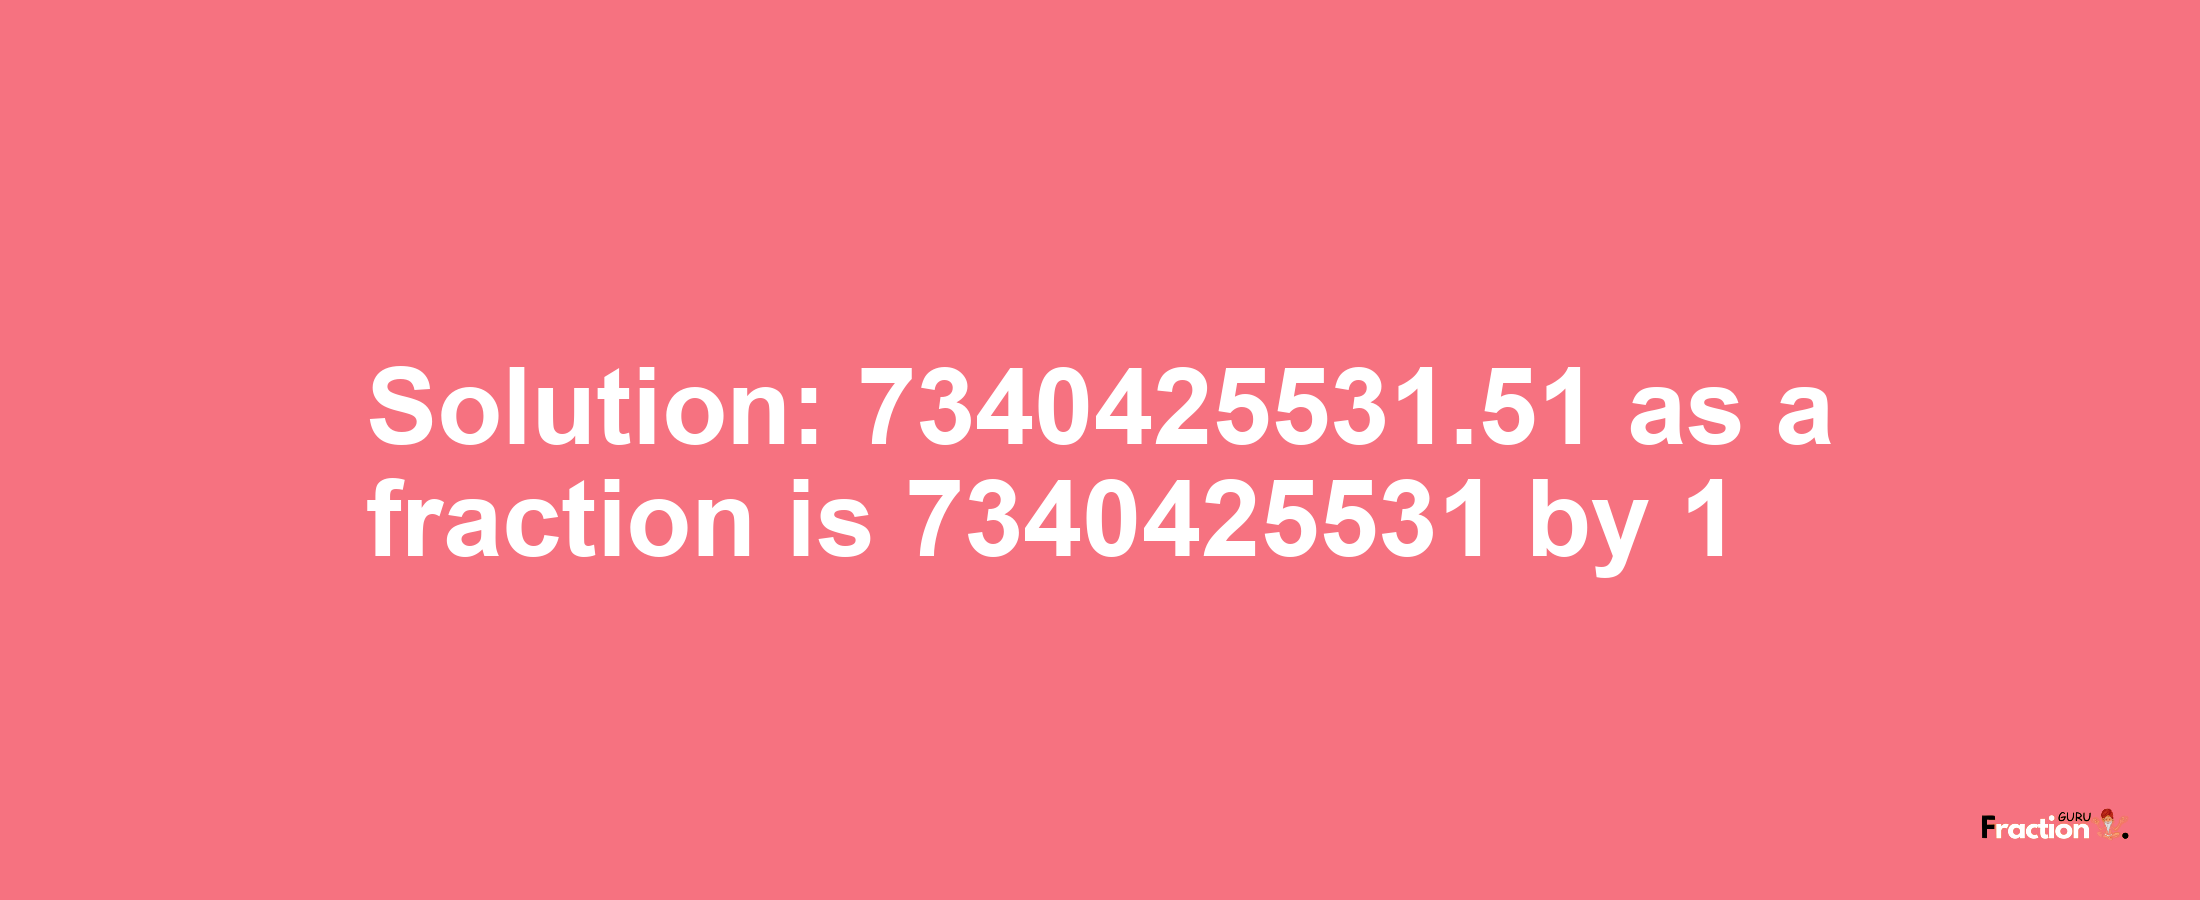 Solution:7340425531.51 as a fraction is 7340425531/1